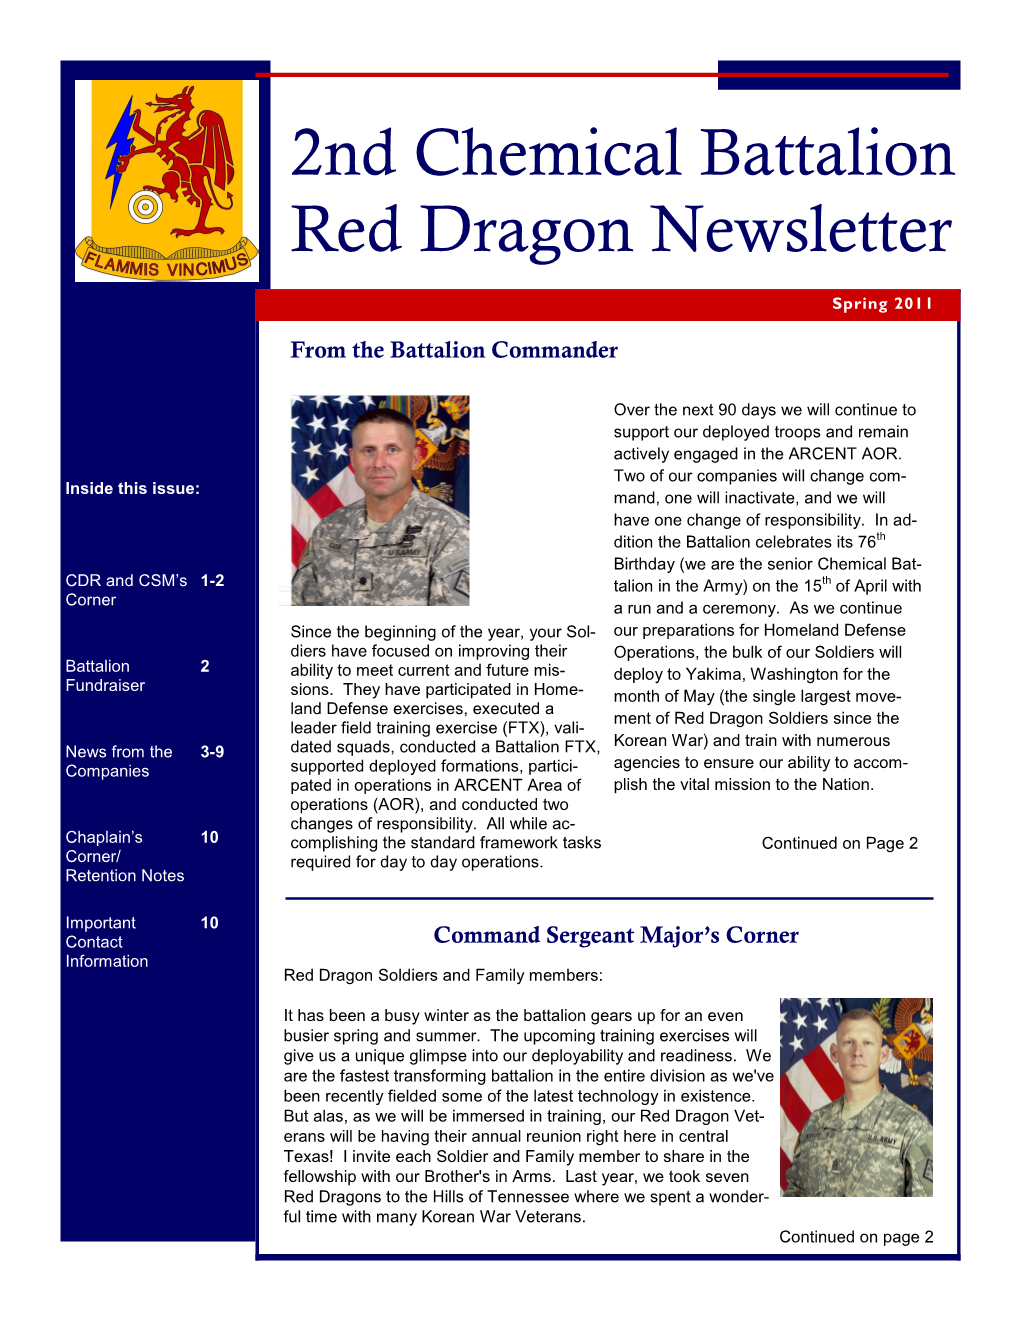 2Nd Chemical Battalion Red Dragon Newsletter